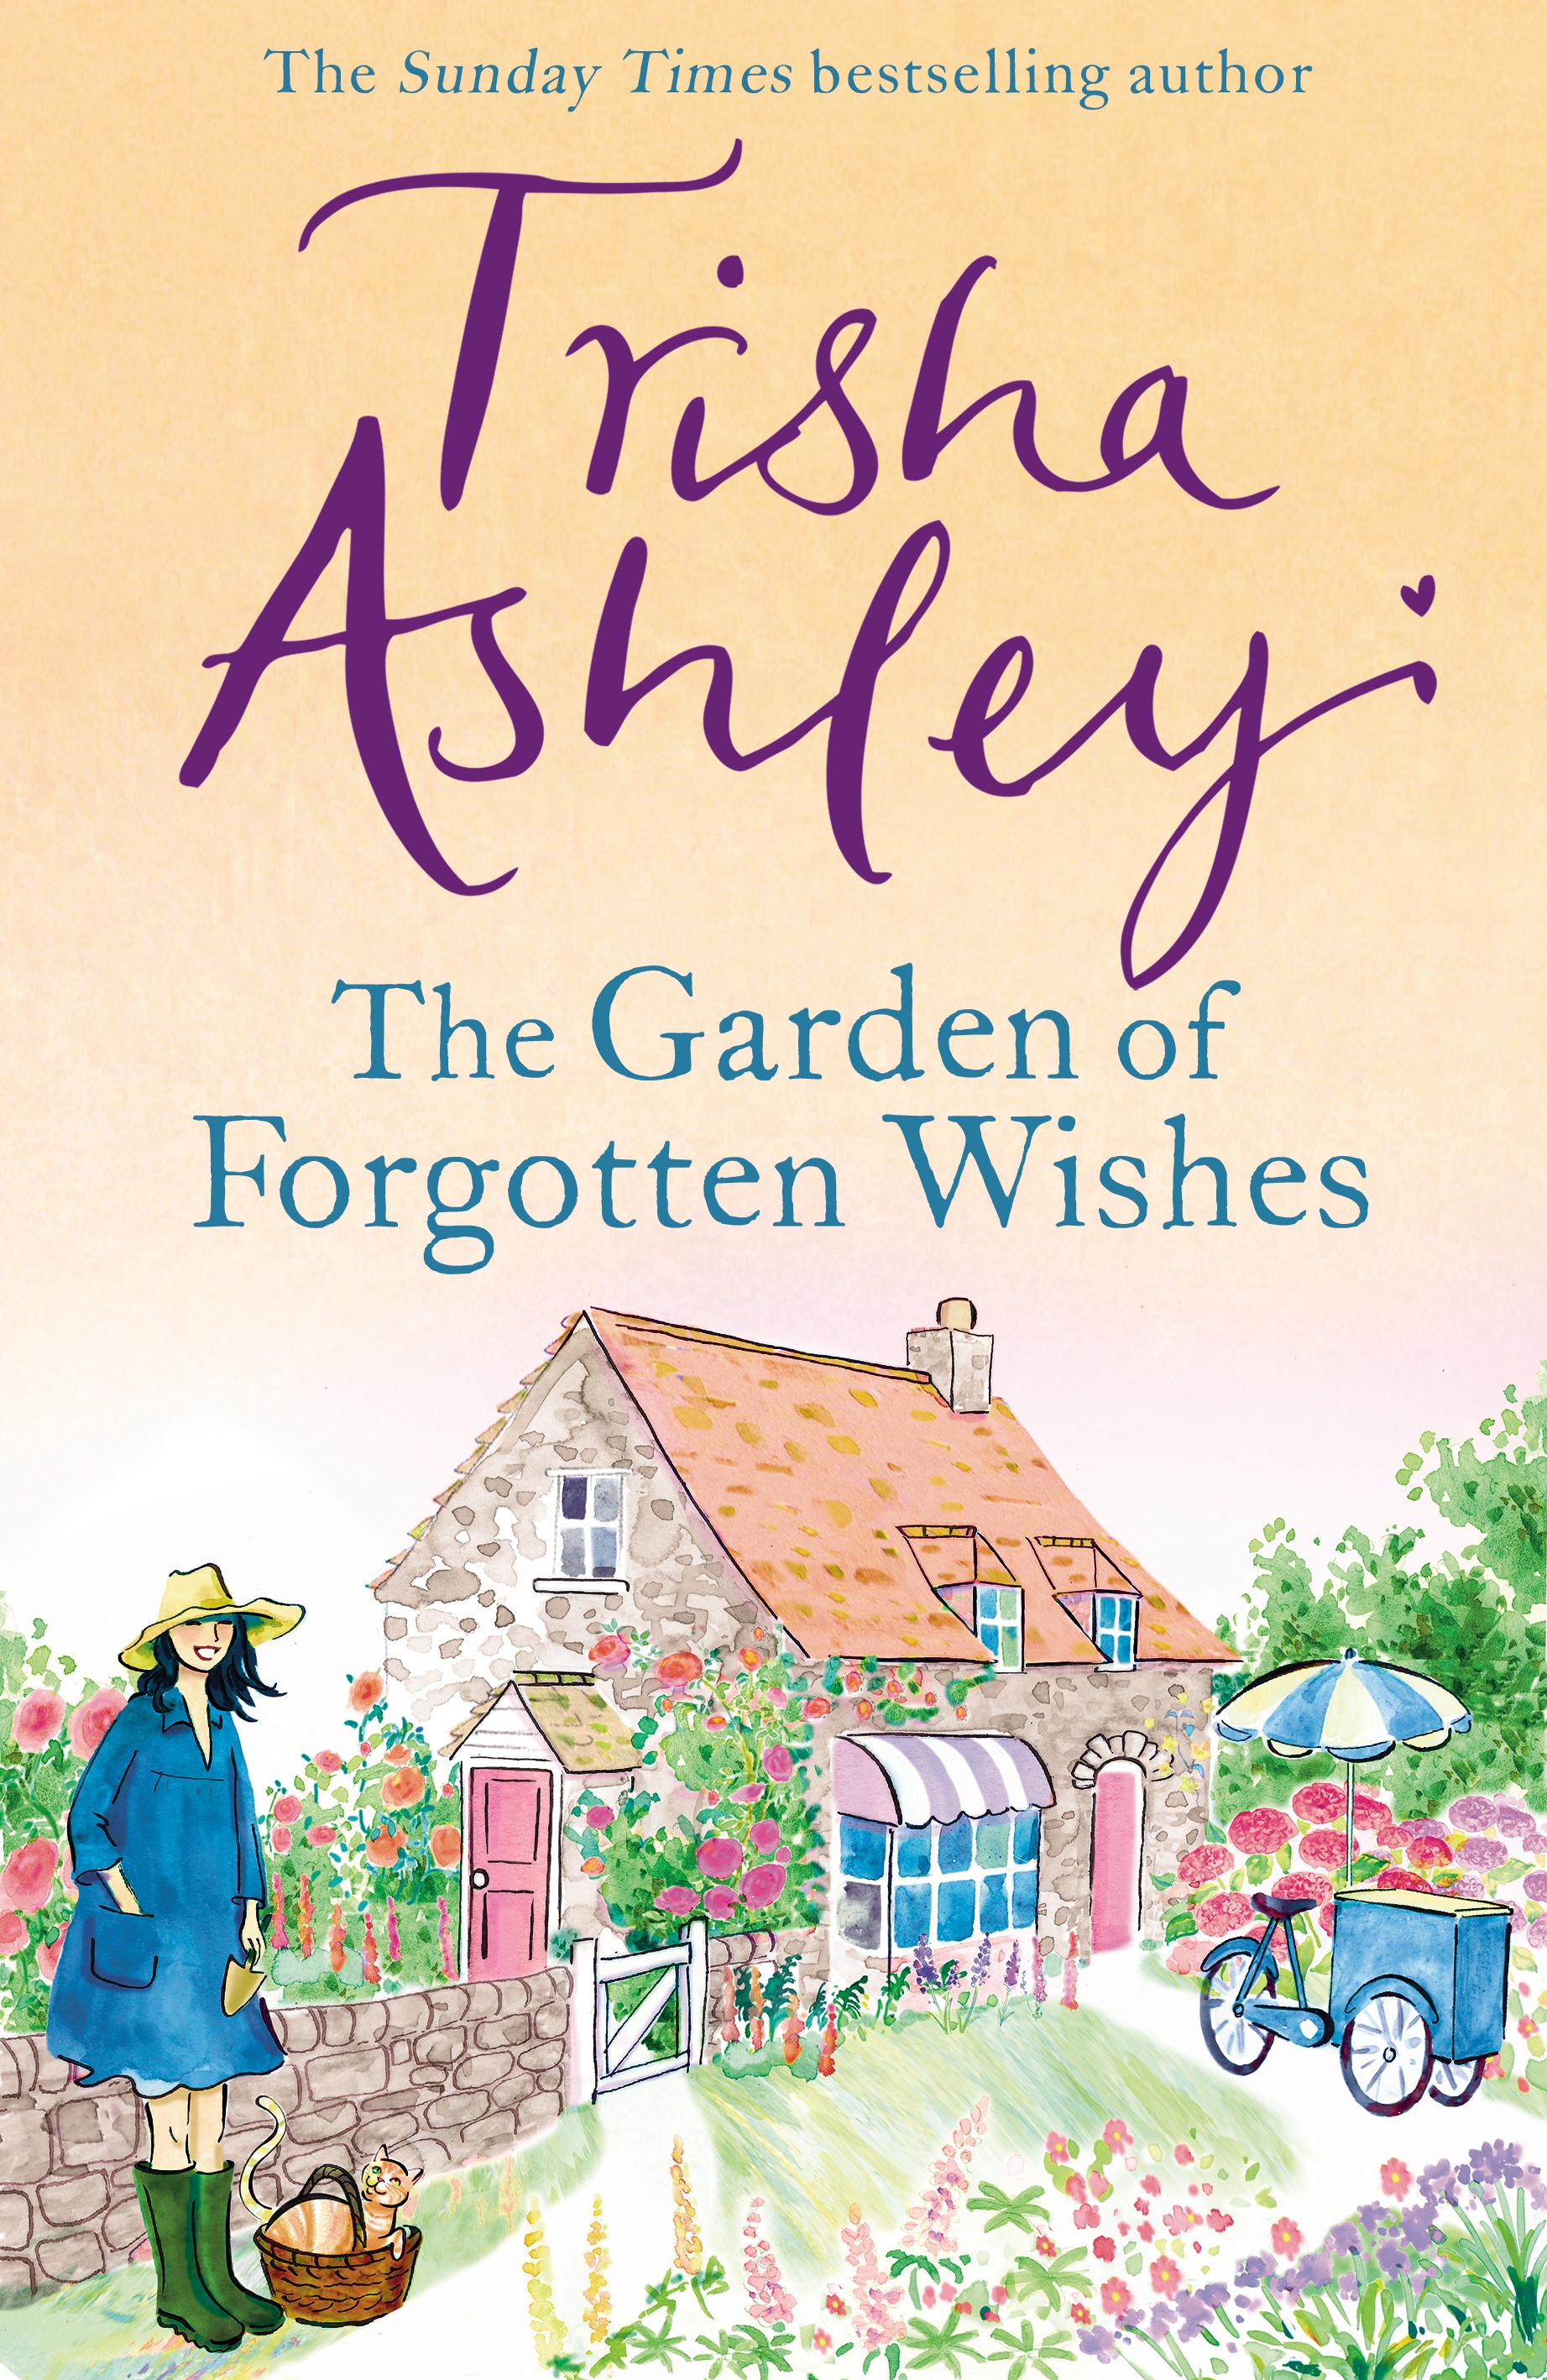 Book “The Garden of Forgotten Wishes” by Trisha Ashley — July 23, 2020